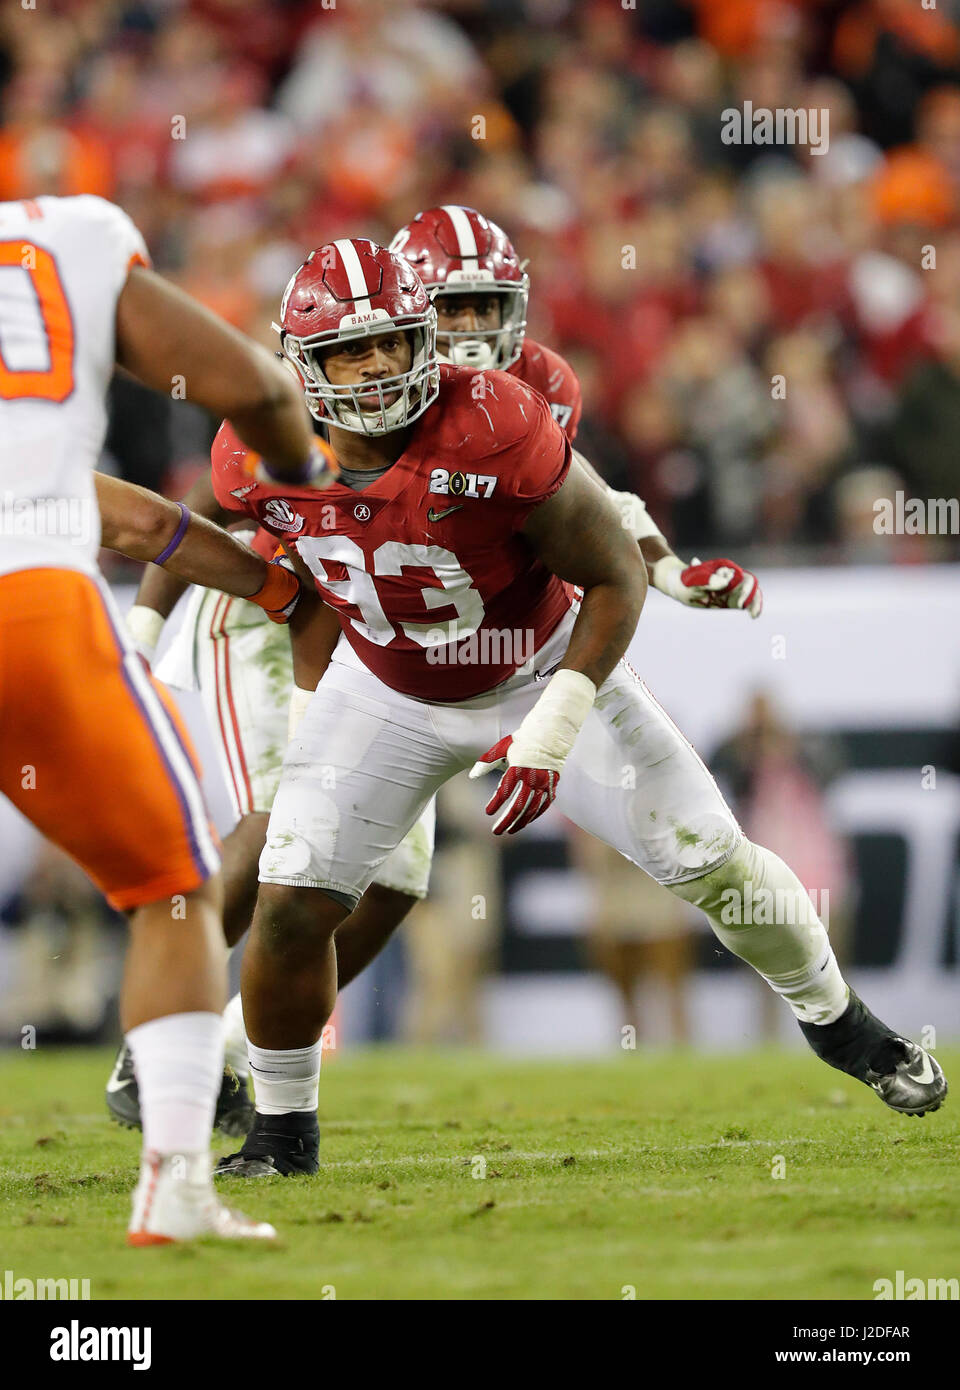 January, 9 2017 Tampa, FL.Alabama Crimson Tide defensive lineman (93) Jonathan Allen in action during the National Championship college football game between the Clemson Tigers, and Alabama Crimson Tide, on January 9, 2017. The Clemson Tigers beat the Alabama Crimson Tide 35-31 at Raymond James Stadium for the National Title, in Tampa, FL. (Absolute Complete Photographer & Company Credit: Jose/MarinMedia.org/Cal Sport Media) (Network Television please contact your Sales Representative for Television usage.) (Television news usage must over-burn ''MarinMedia'' on the top right corner of t Stock Photo